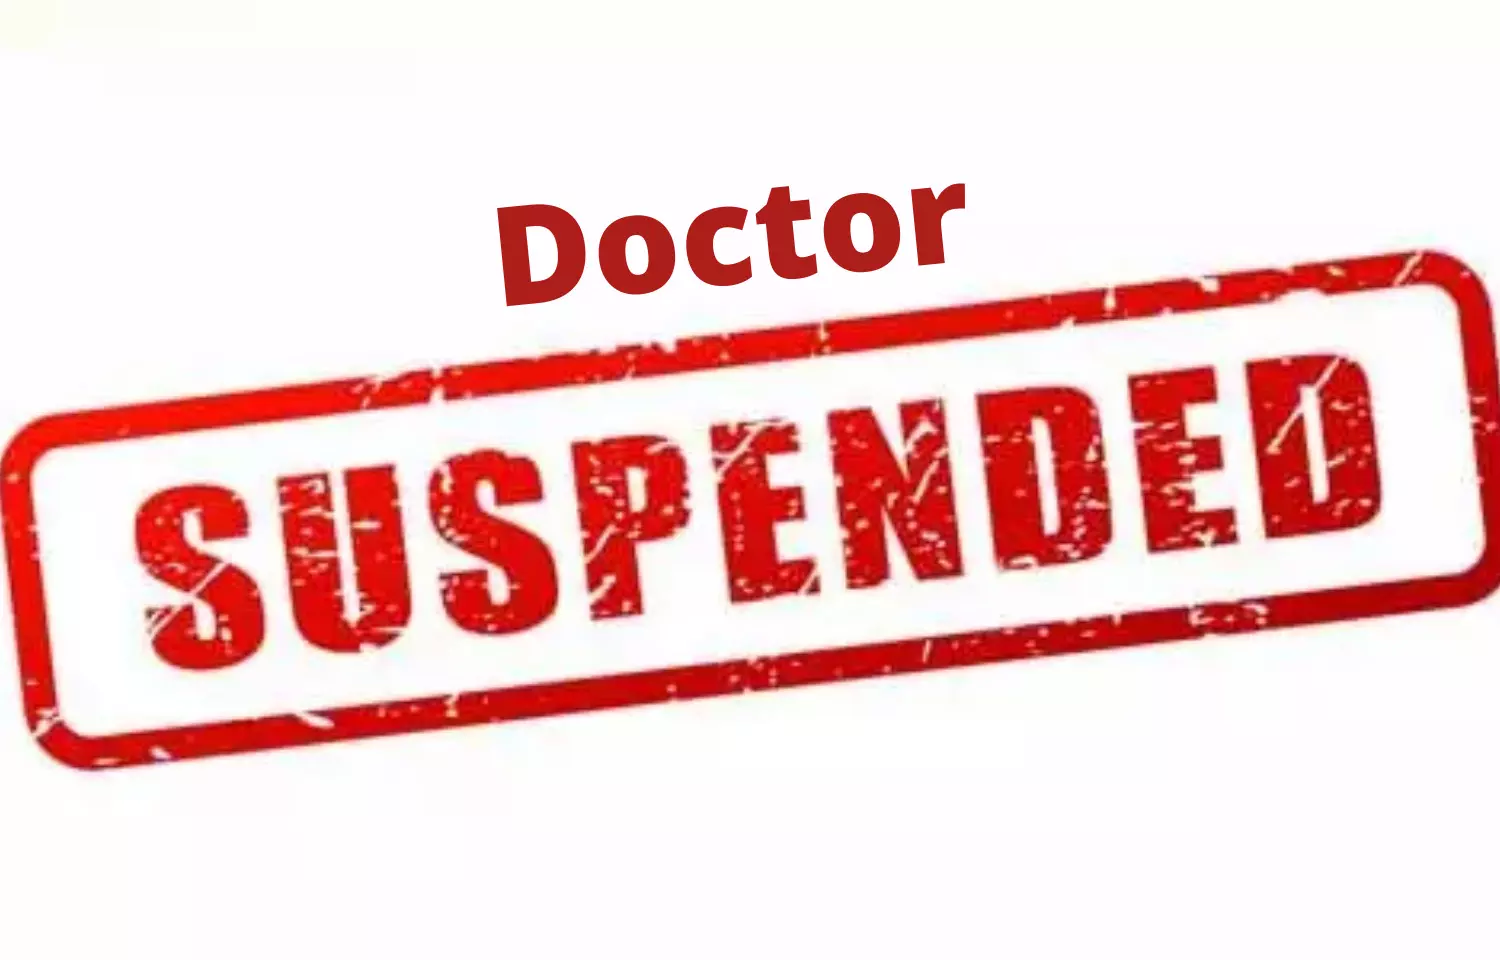 TN Govt Doctor suspended for unauthorized absence; Son found treating patients